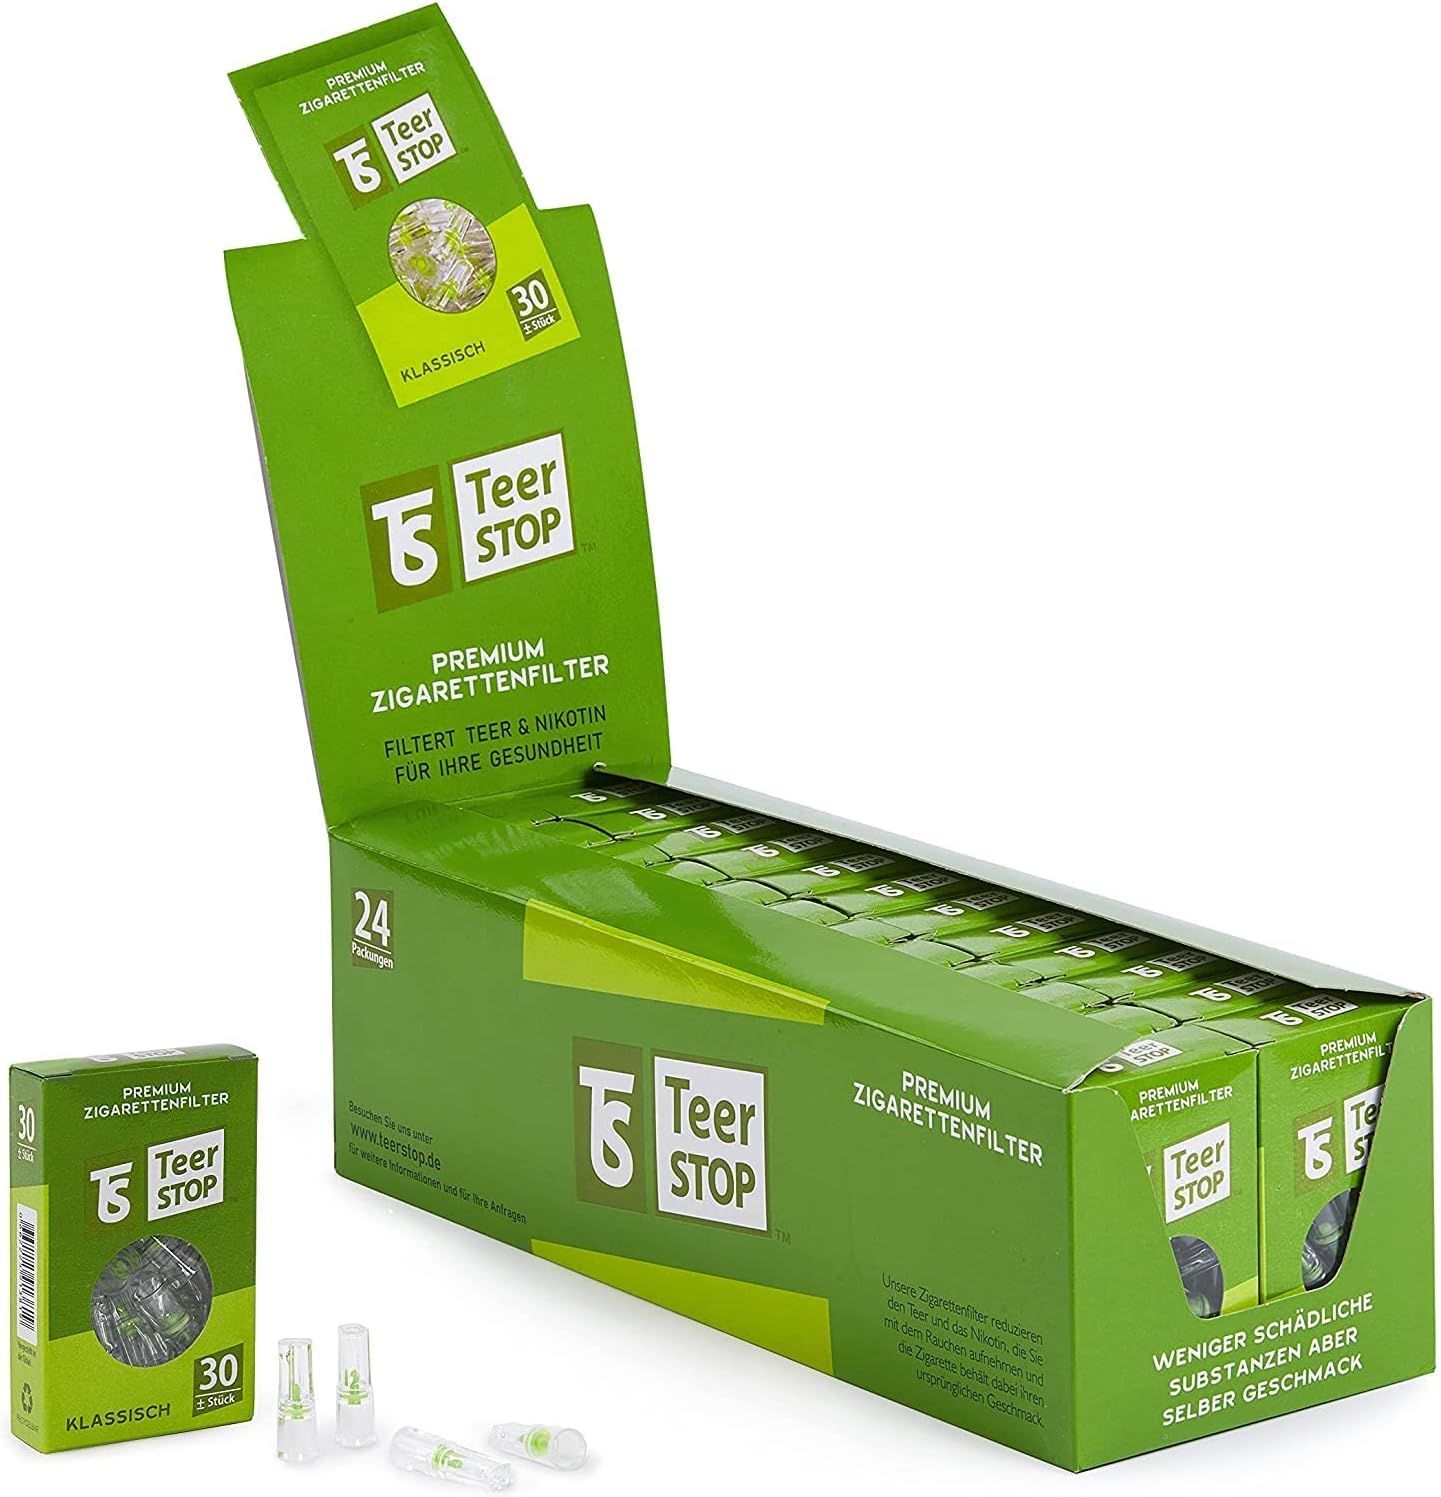 TS Teer STOP Box Premium Disposable Cigarette Filters for Smokers (720 Pieces)